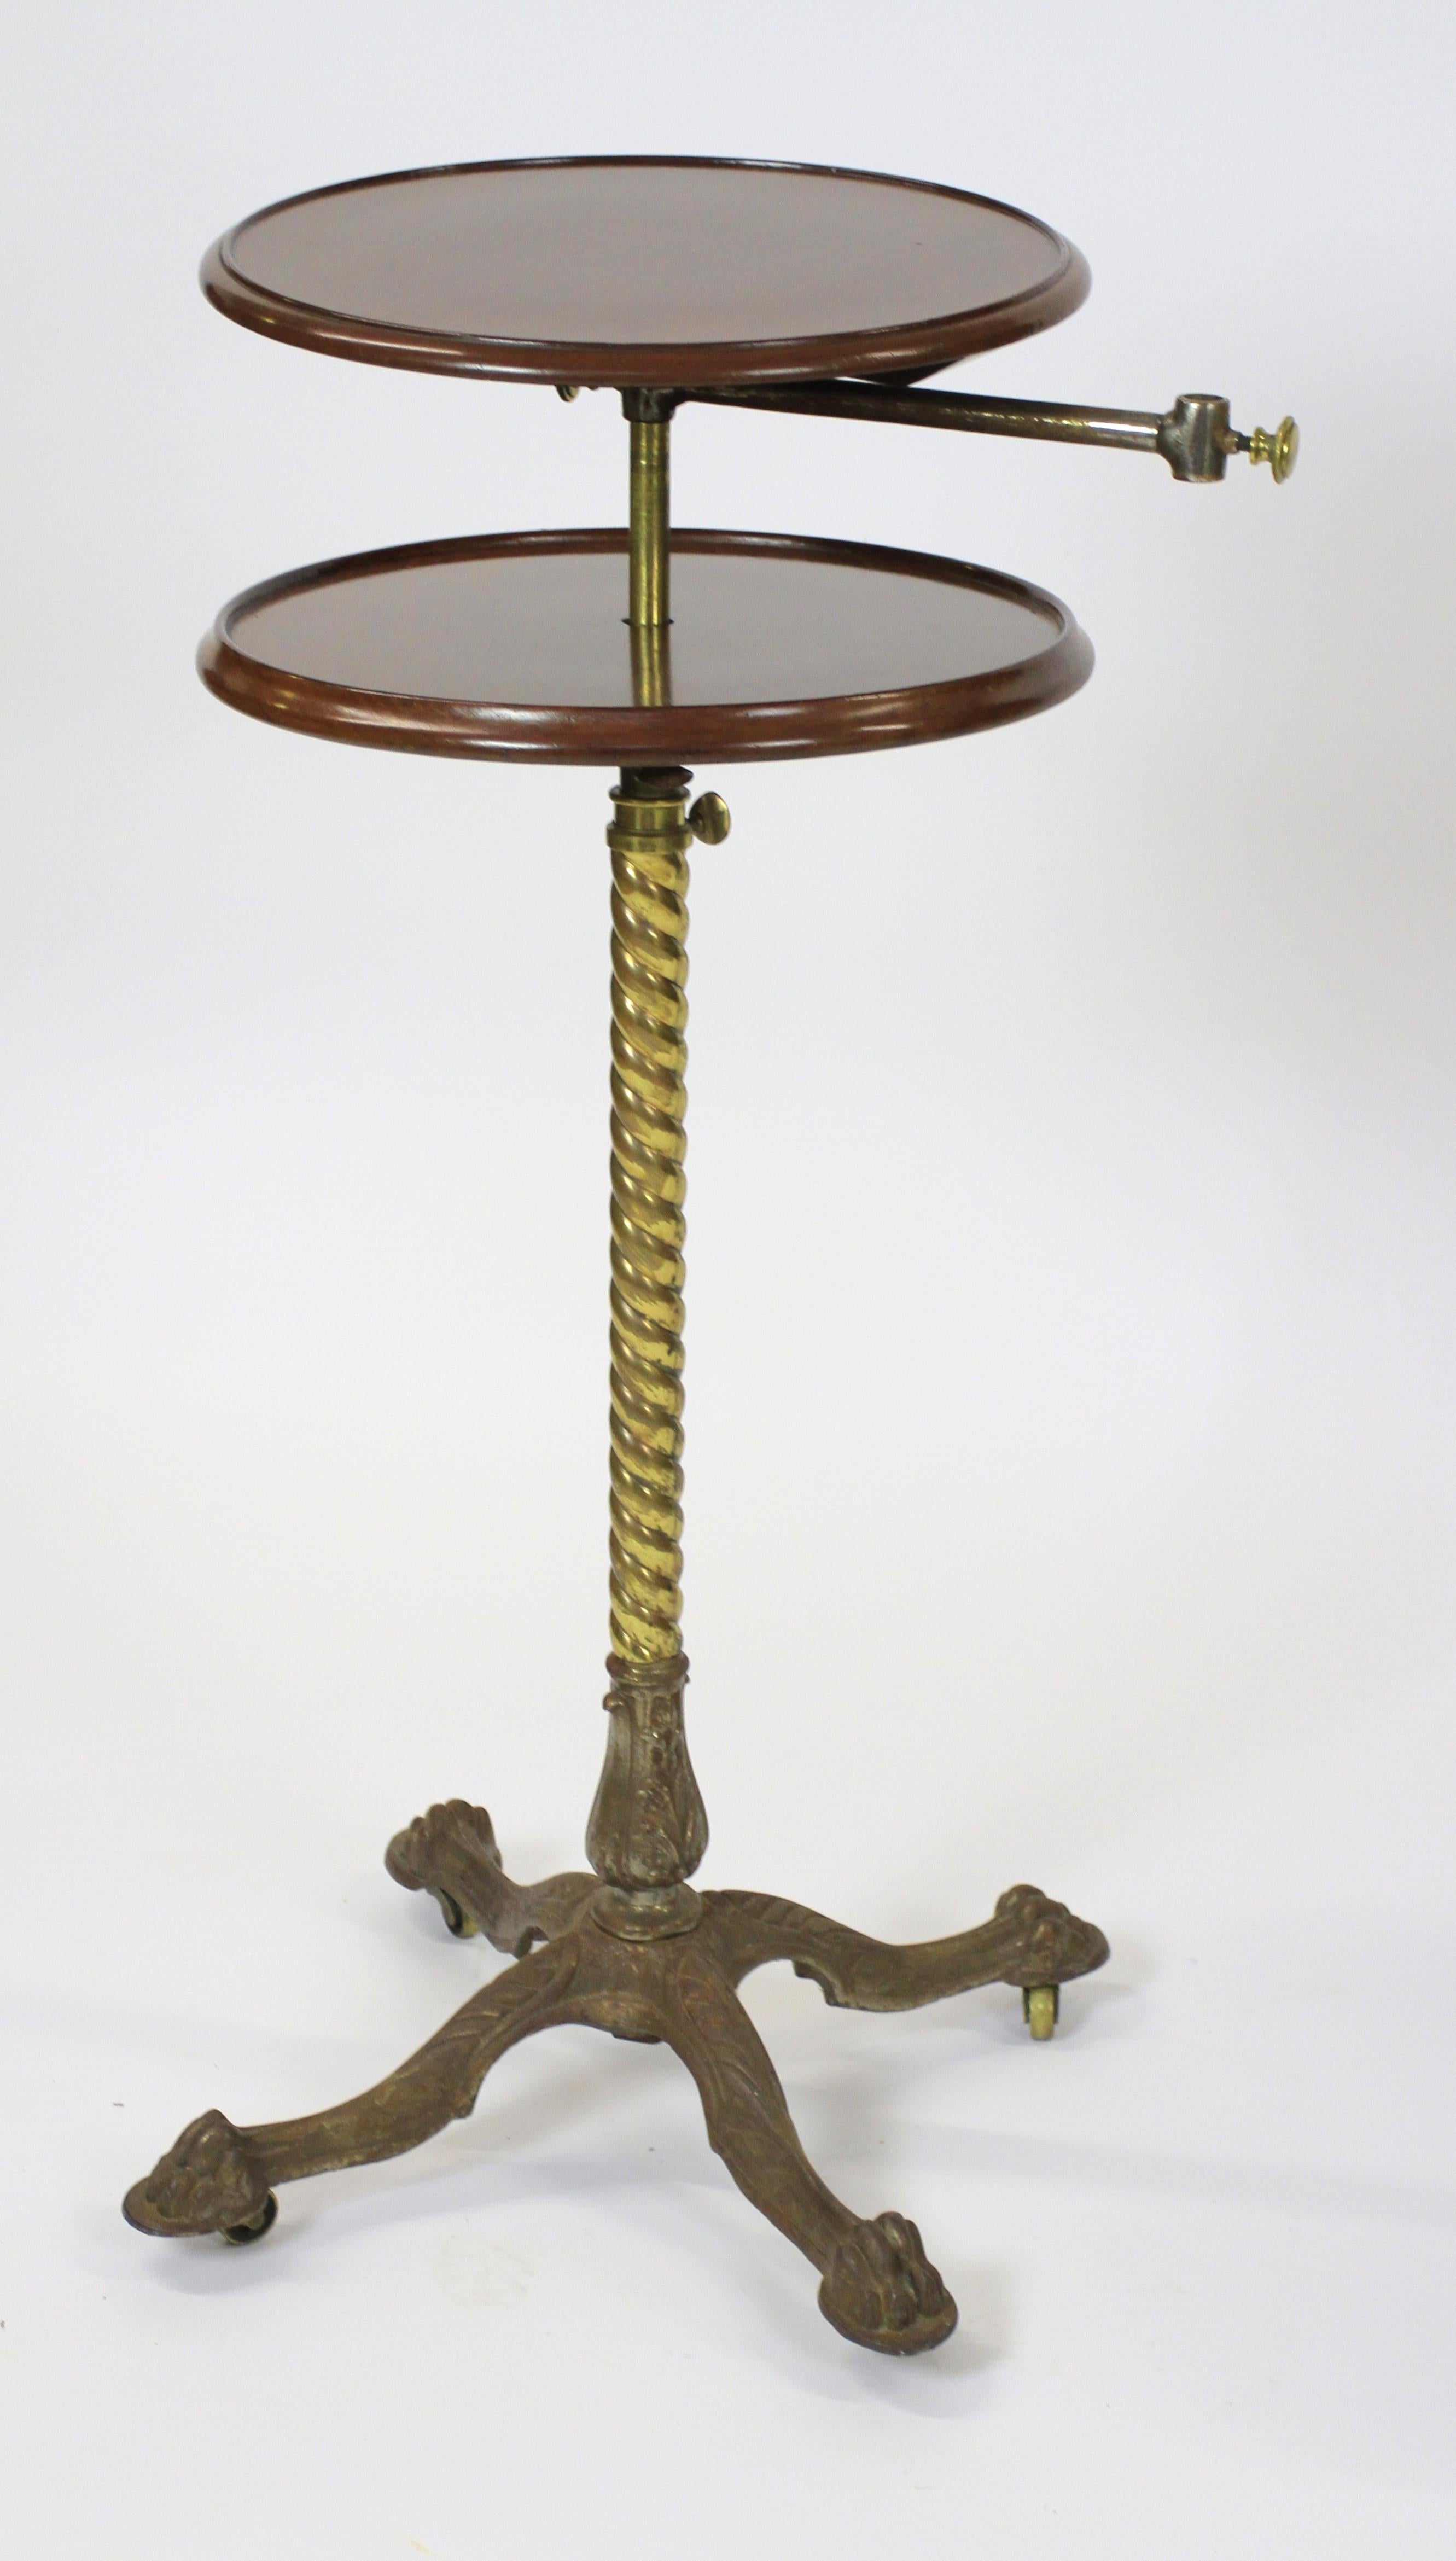 British Victorian Telescopic Music / Reading Stand For Sale